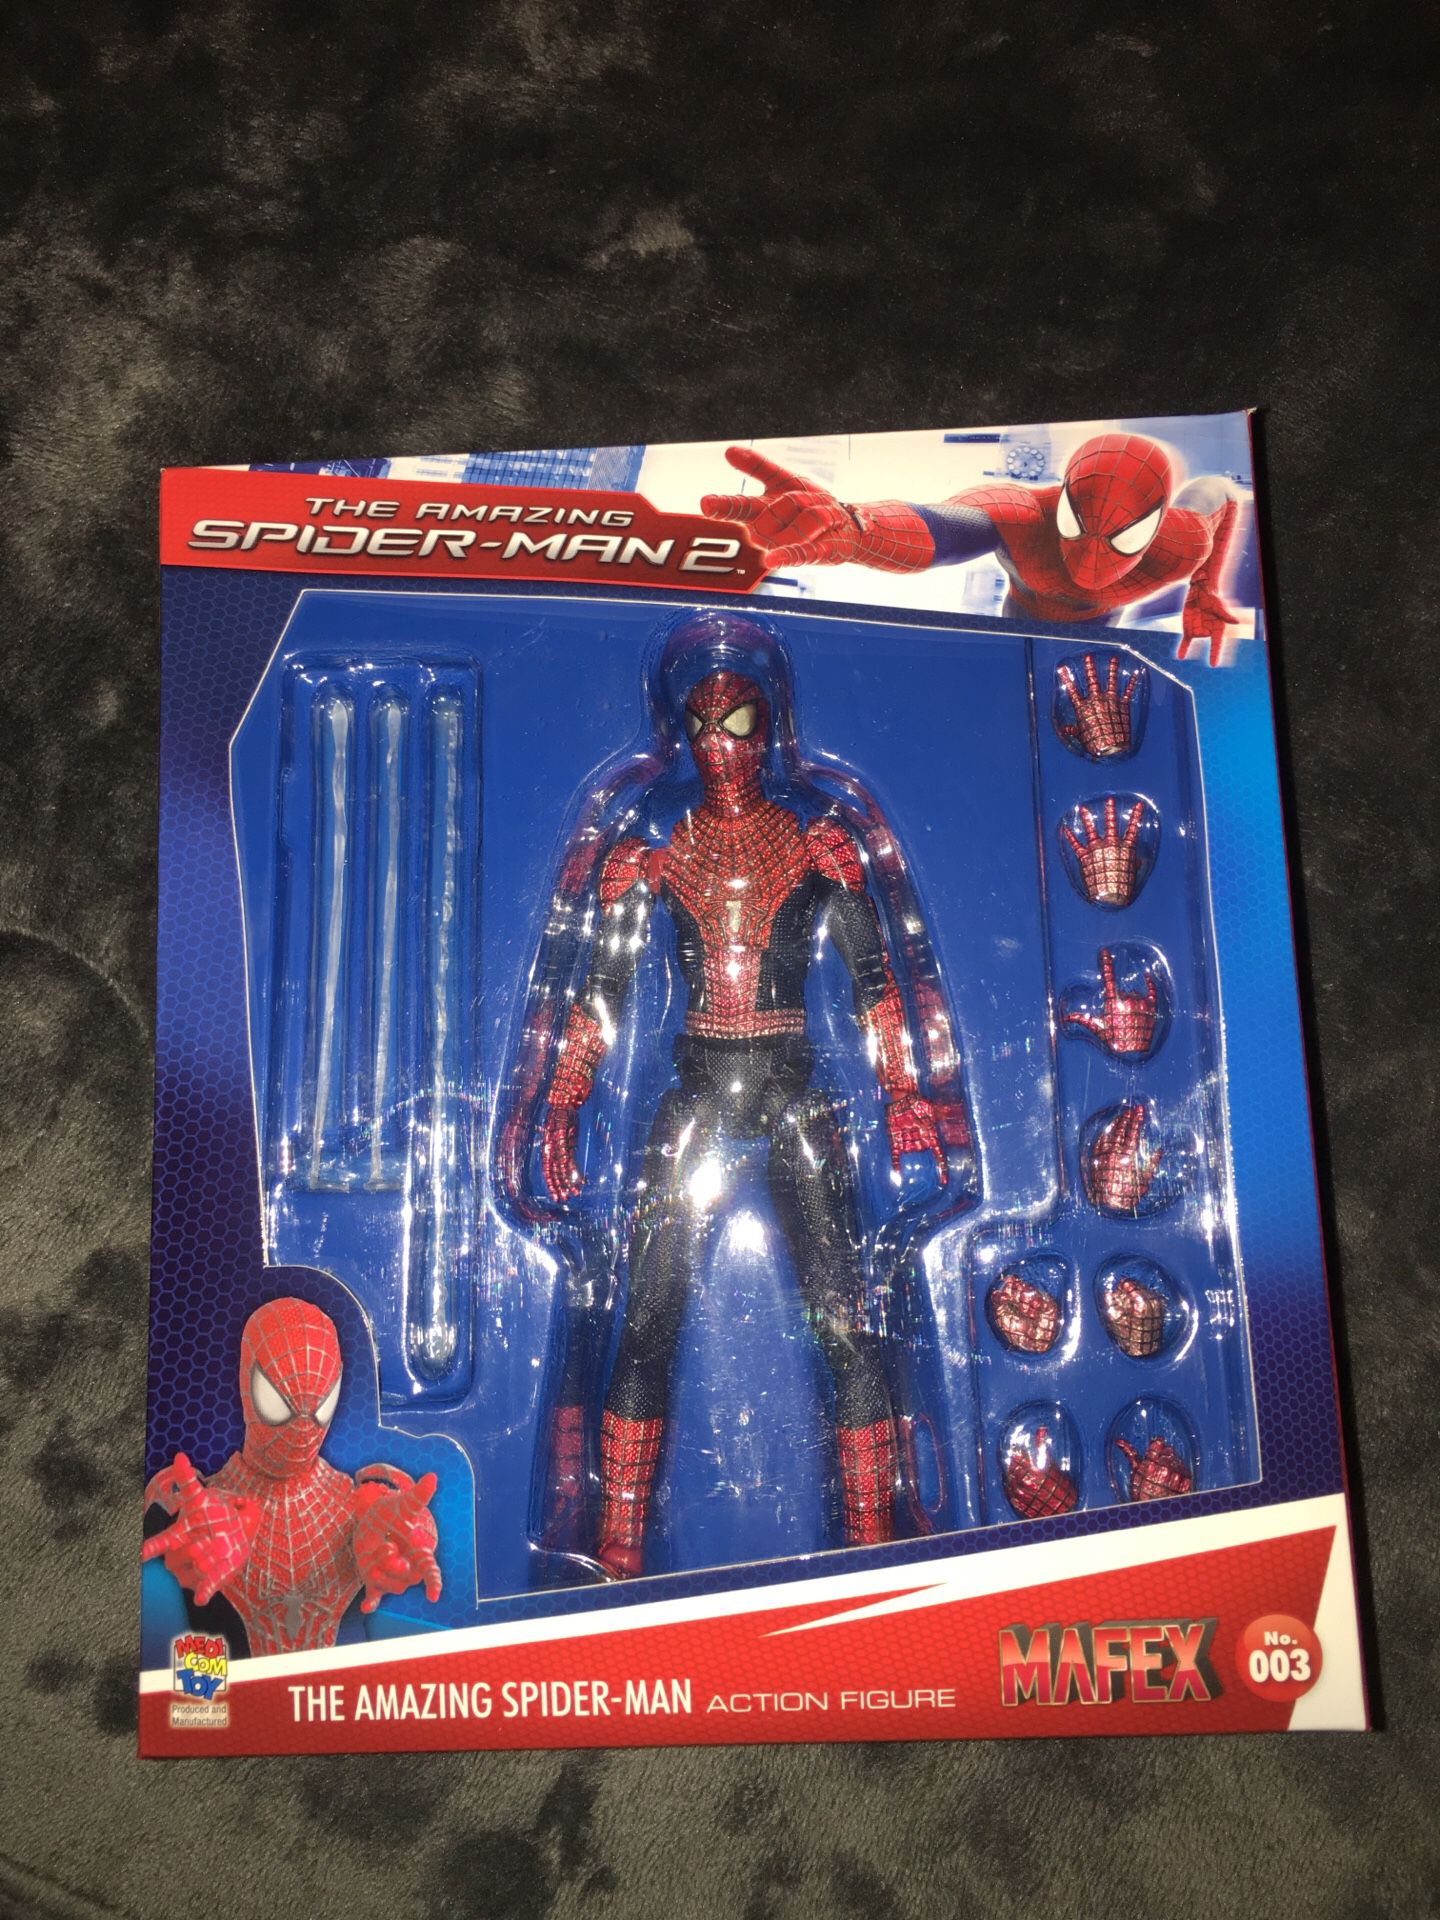 The Amazing Spider-Man Mafex Action Figure